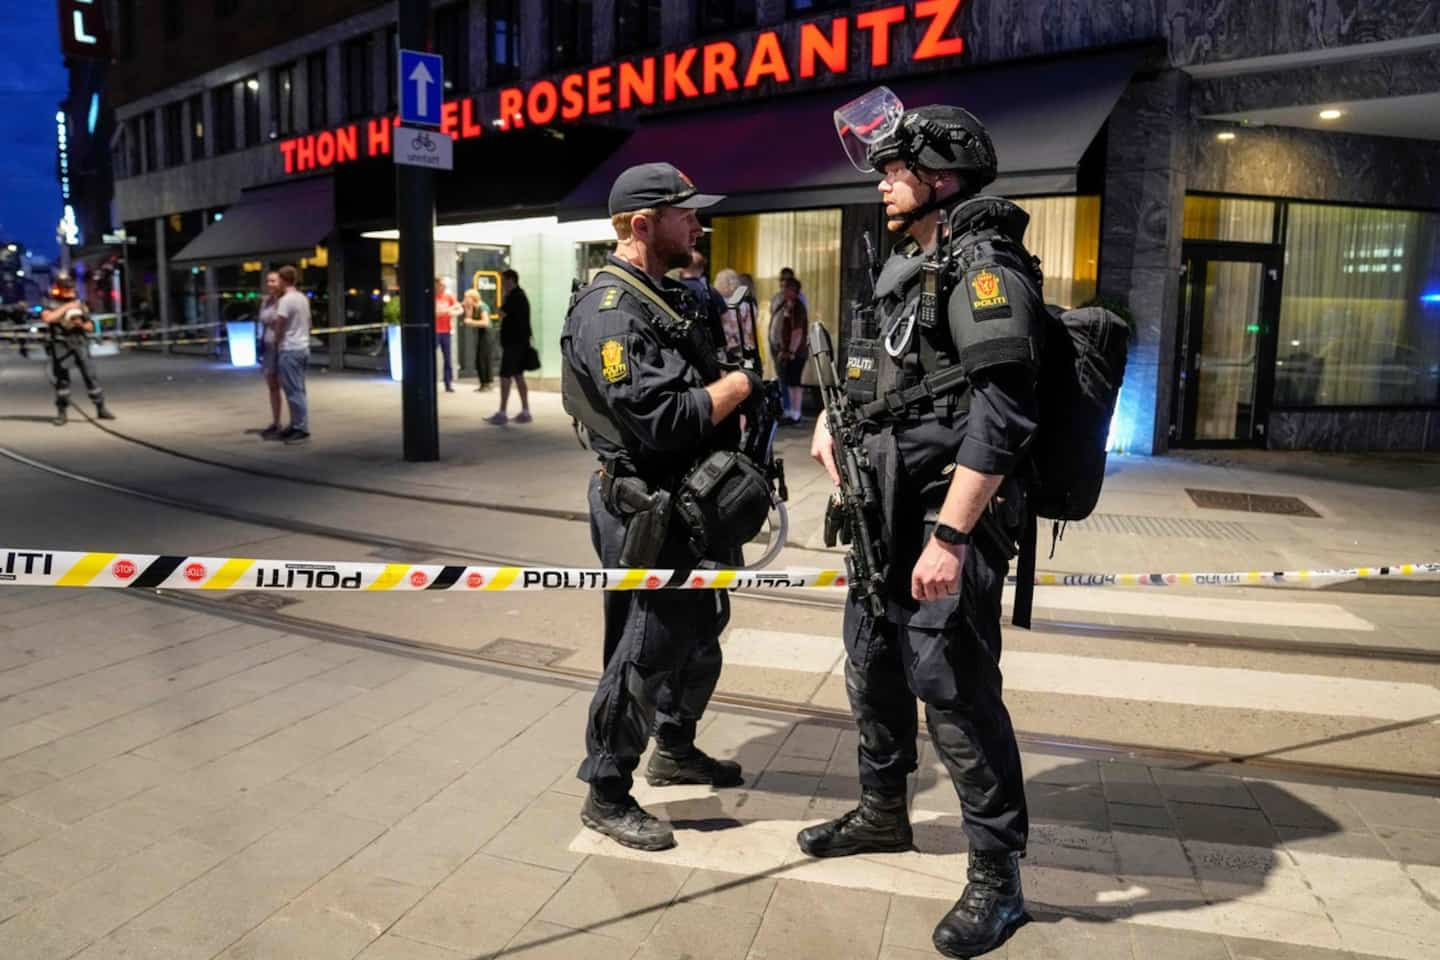 Two dead and several injured in shooting near a gay bar in central Oslo